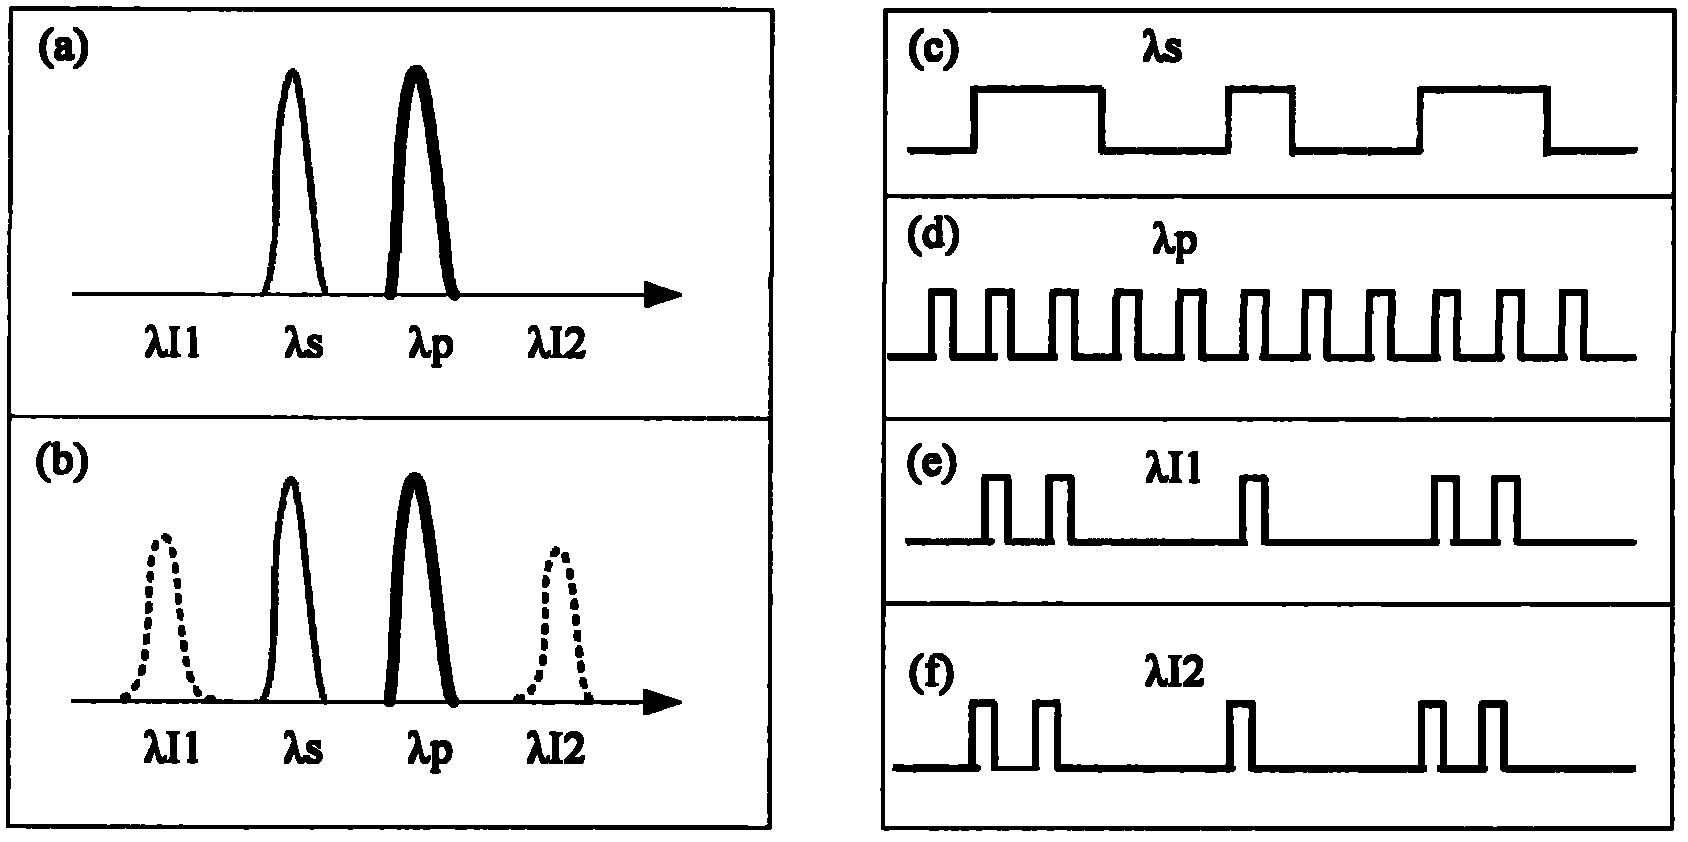 All-optical code conversion method with wavelength conversion function